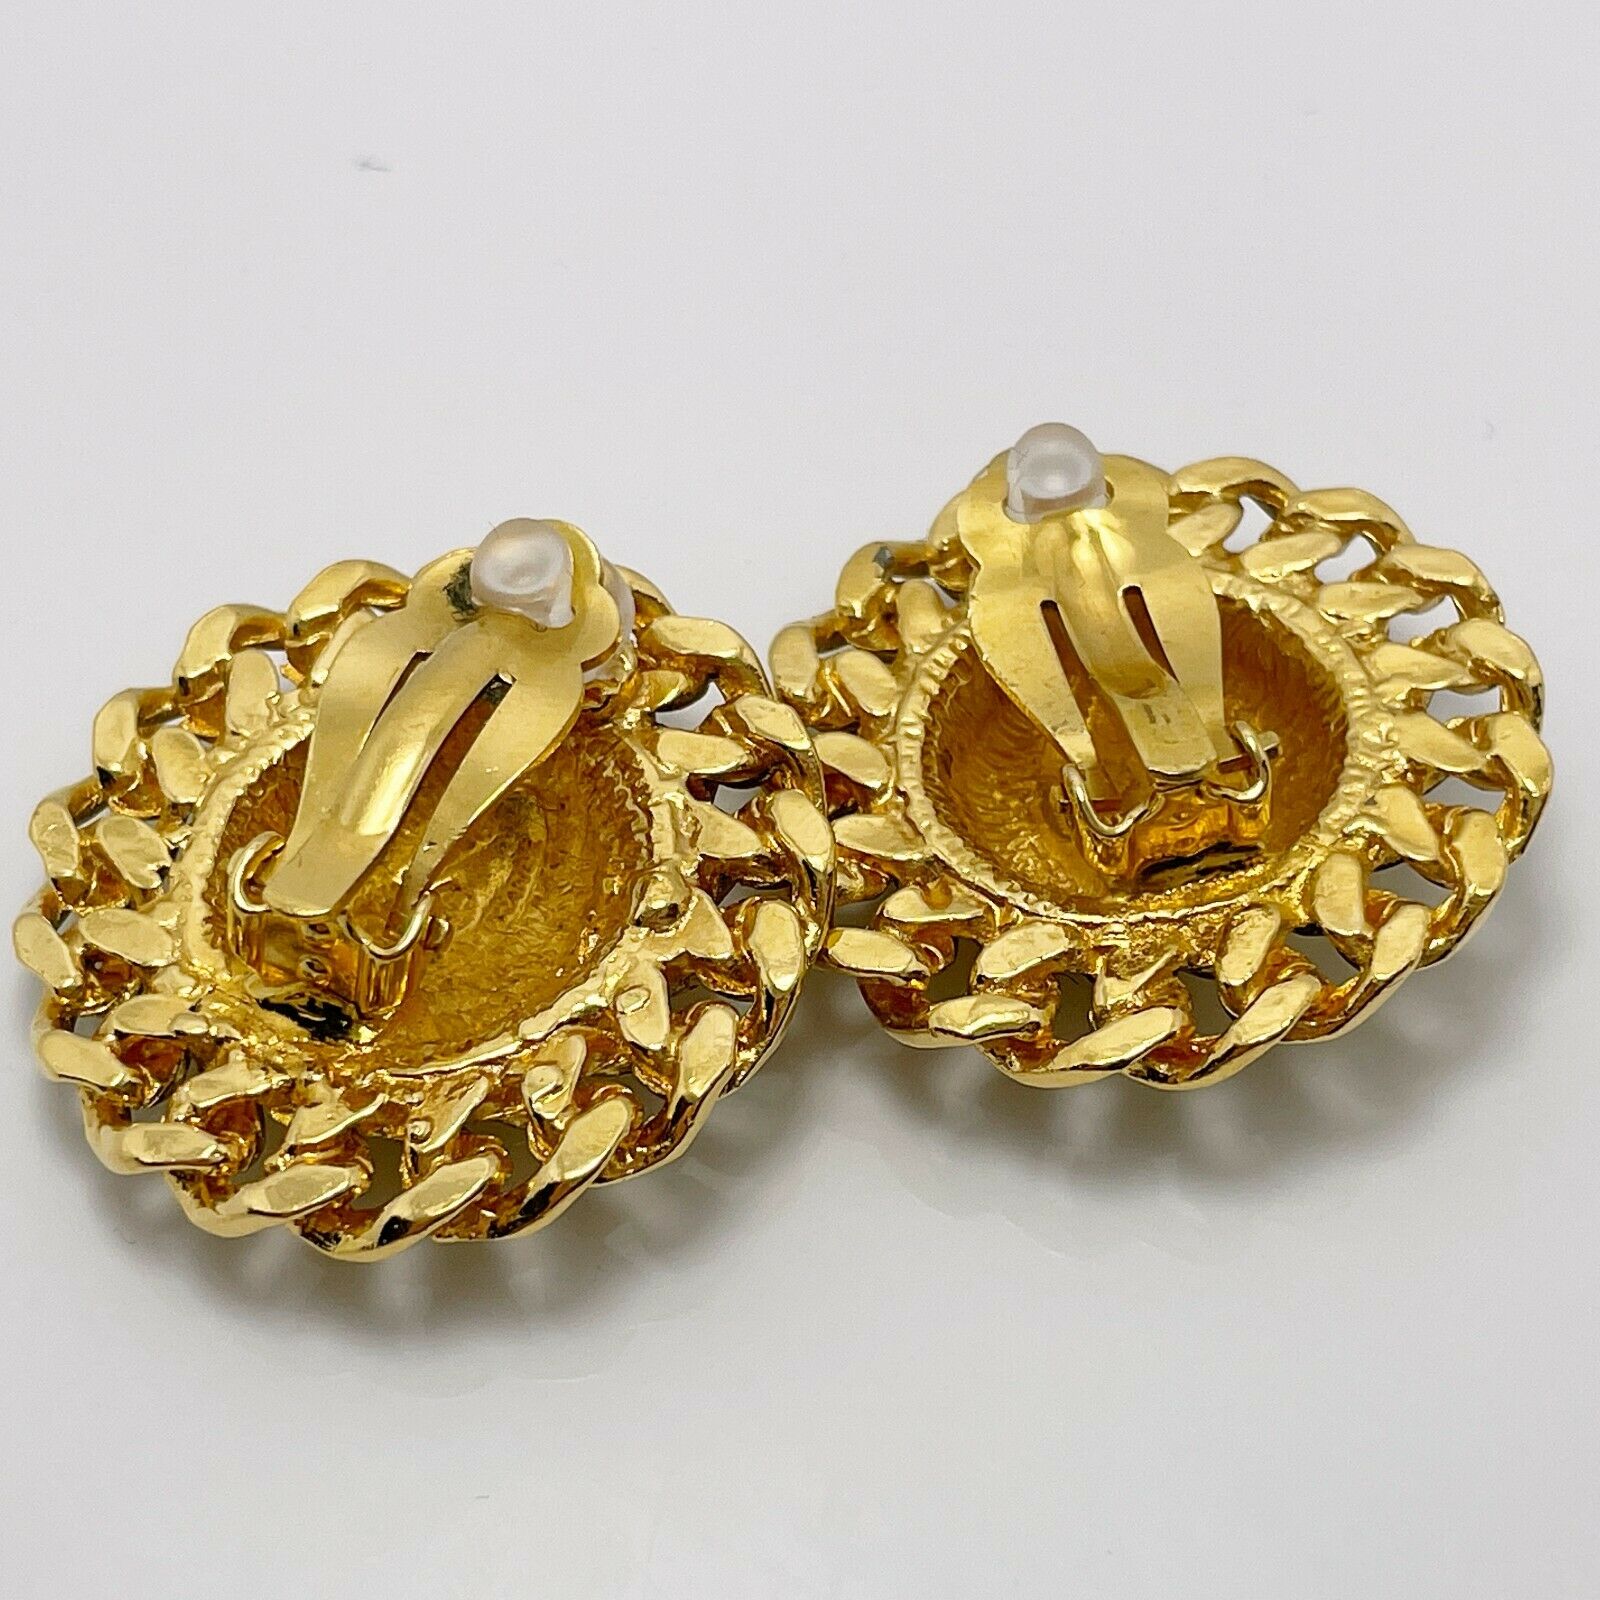 $650 Chanel Quilted 37mm Gold Plated Earrings